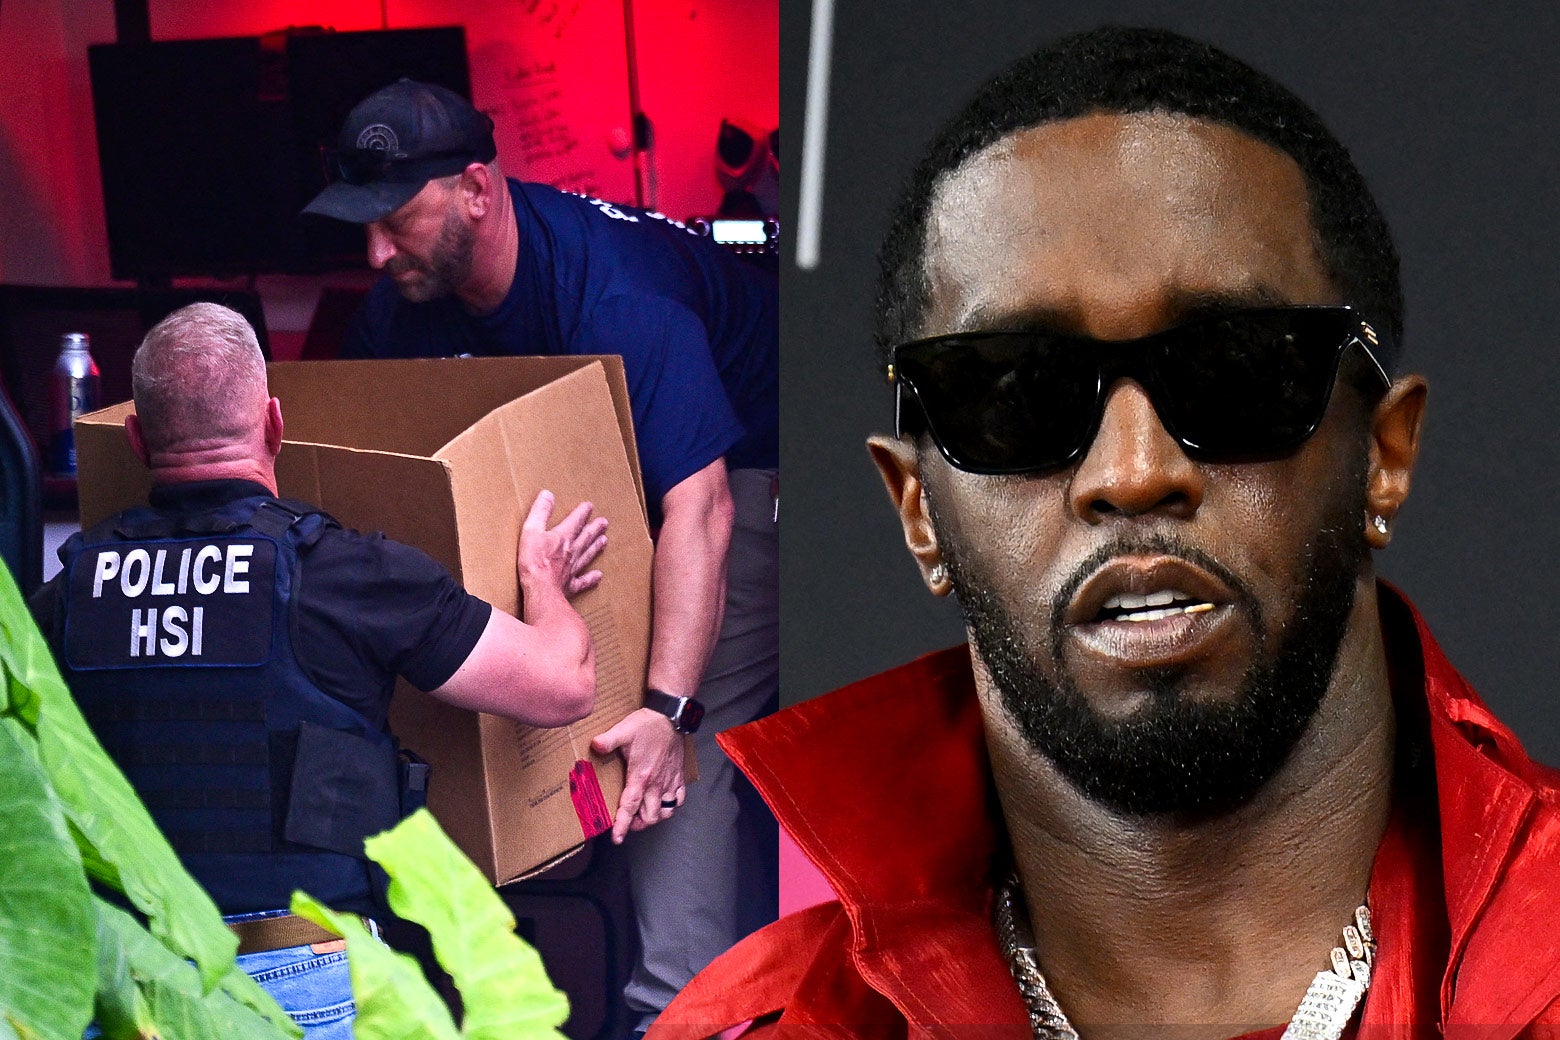 A side by side showing, on the left, men in bulletproof vests that read "Police HSI" carrying boxes. On the right, the rapper and mogul wears sunglasses, gold chains, and a red jacket or shirt with the collar popped.